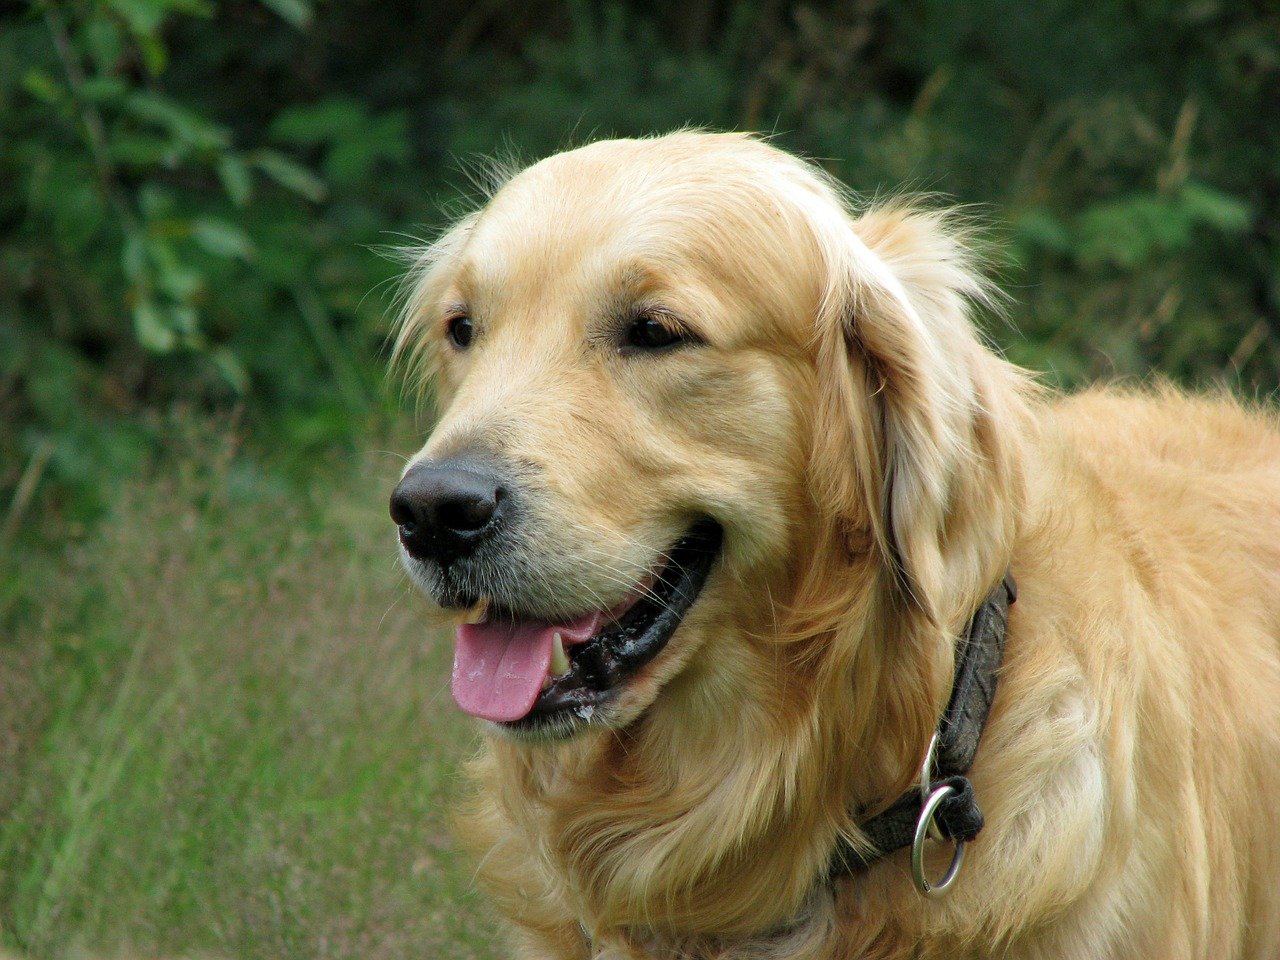 Best Dog Hair Grooming Clippers For A Golden Retriever